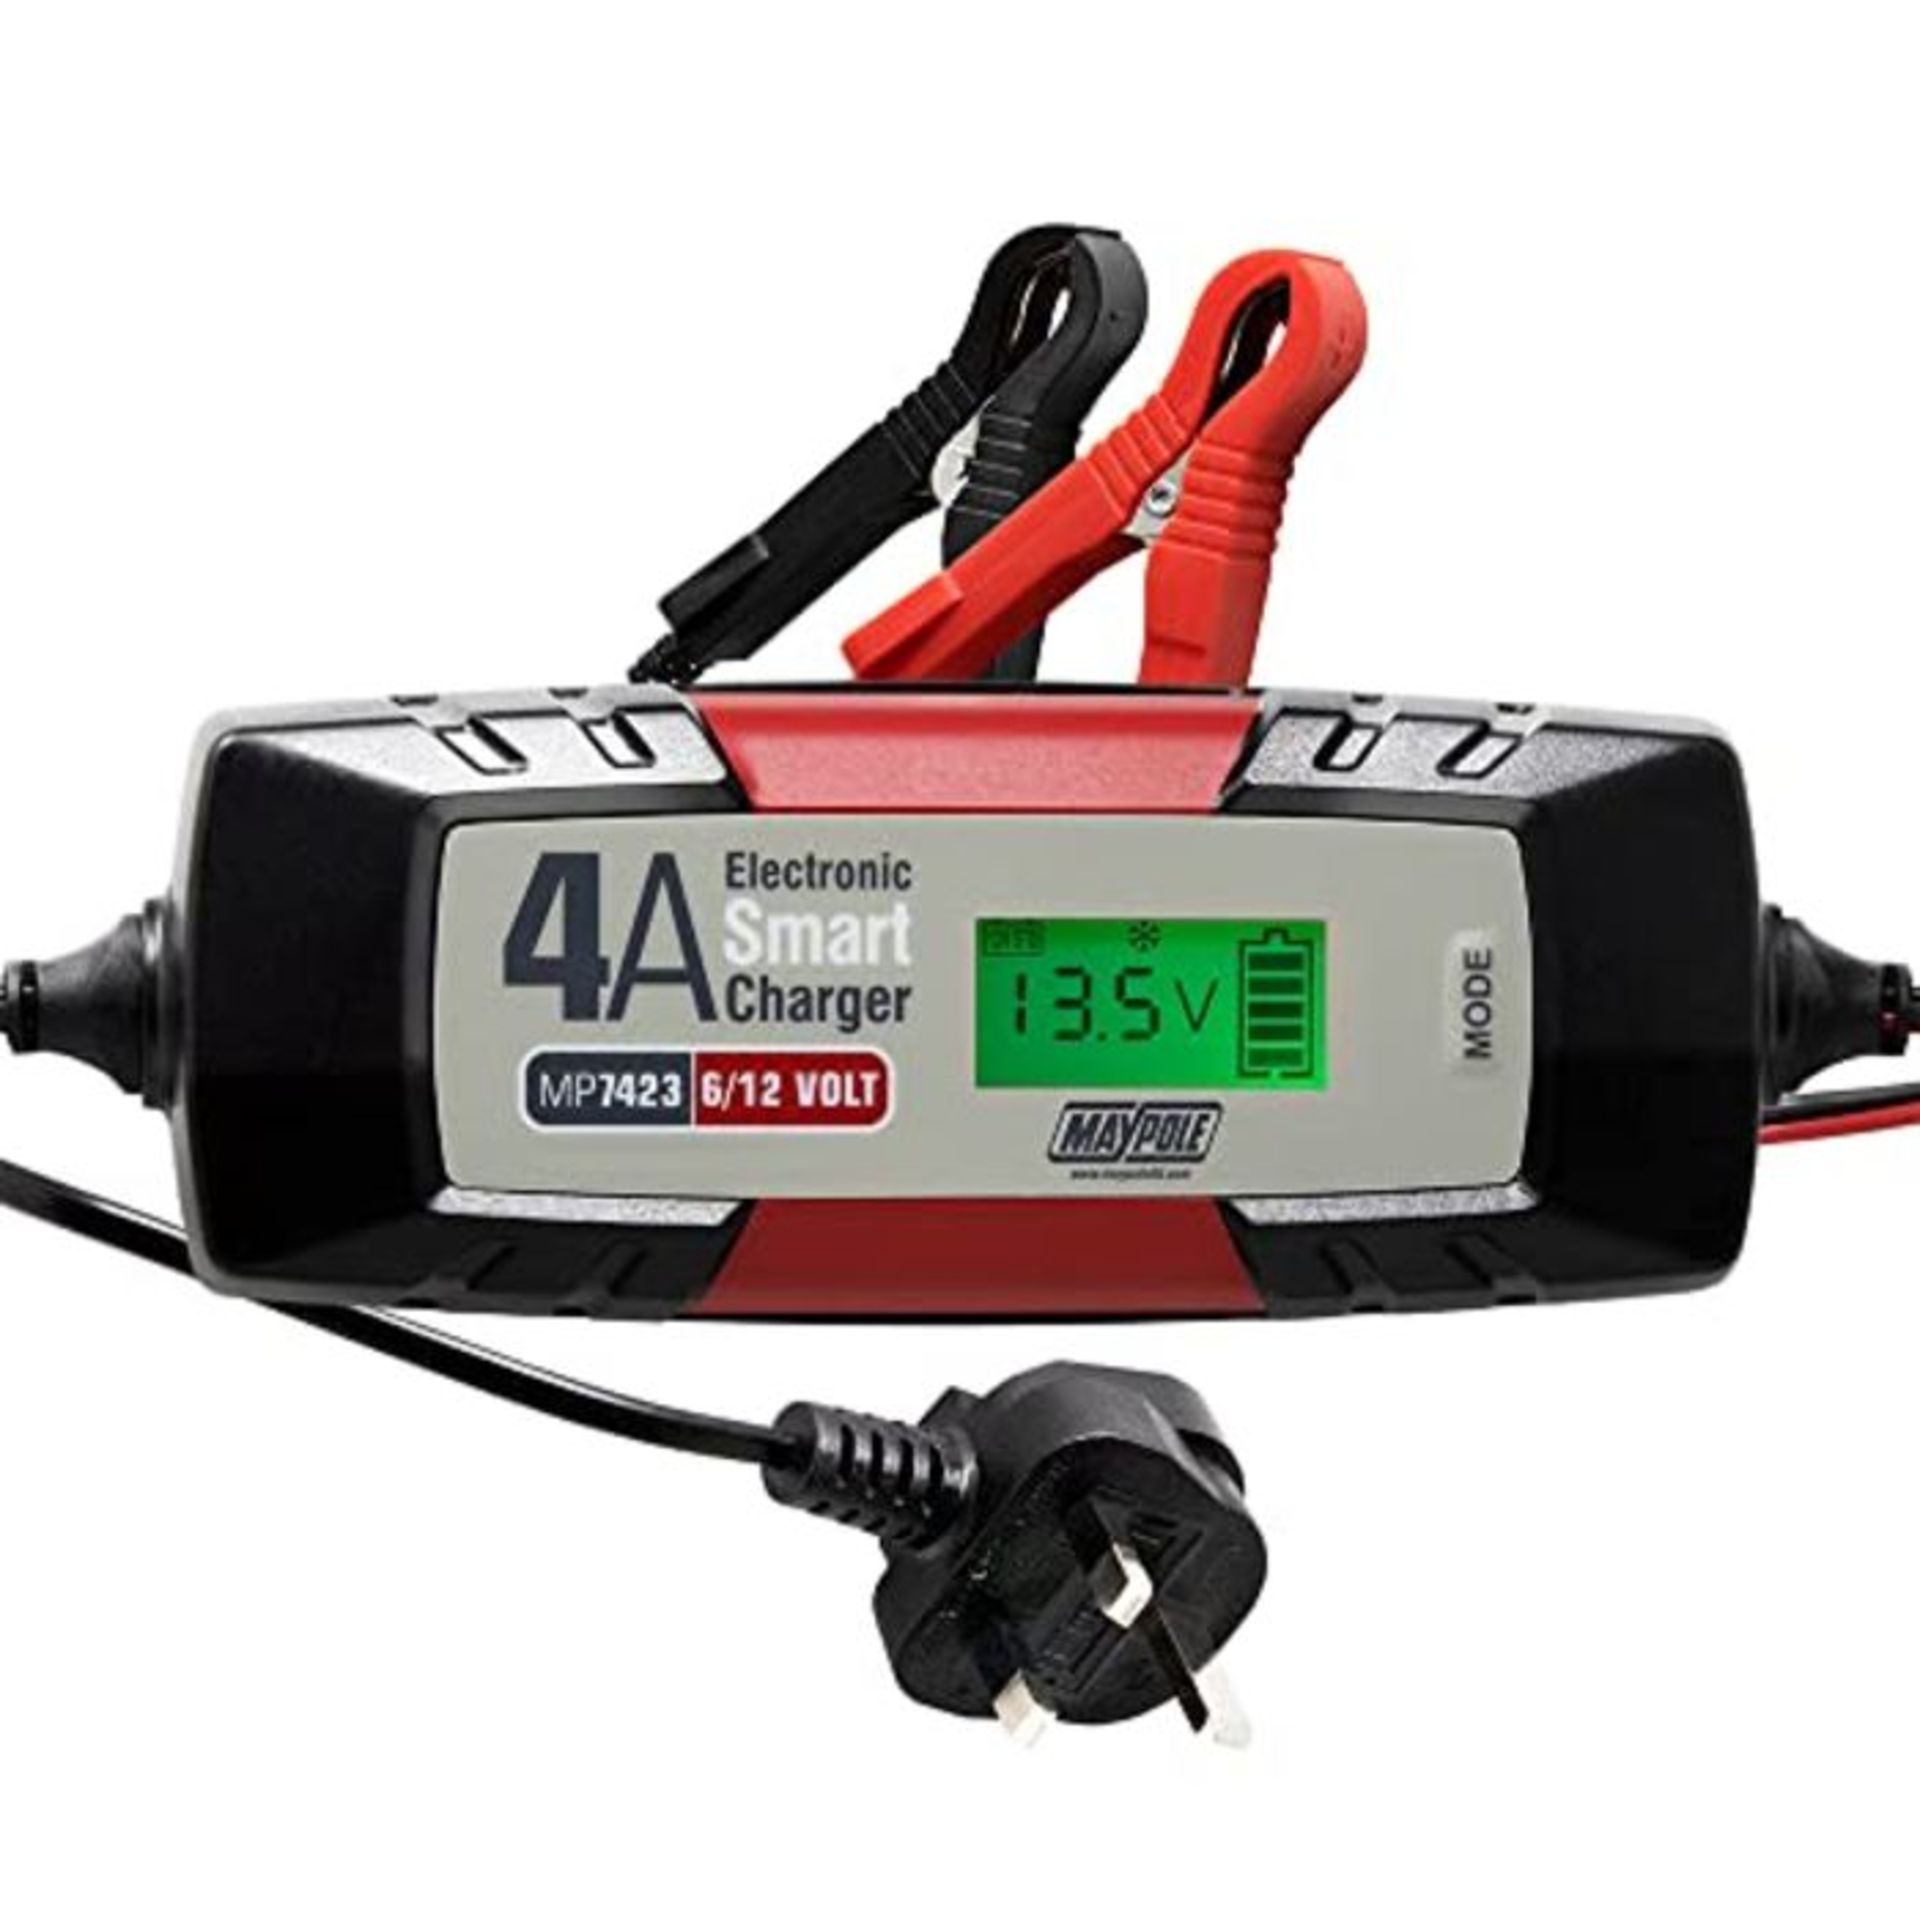 Maypole 7423A Battery Charger Auto Electronic 4A 12V, Black